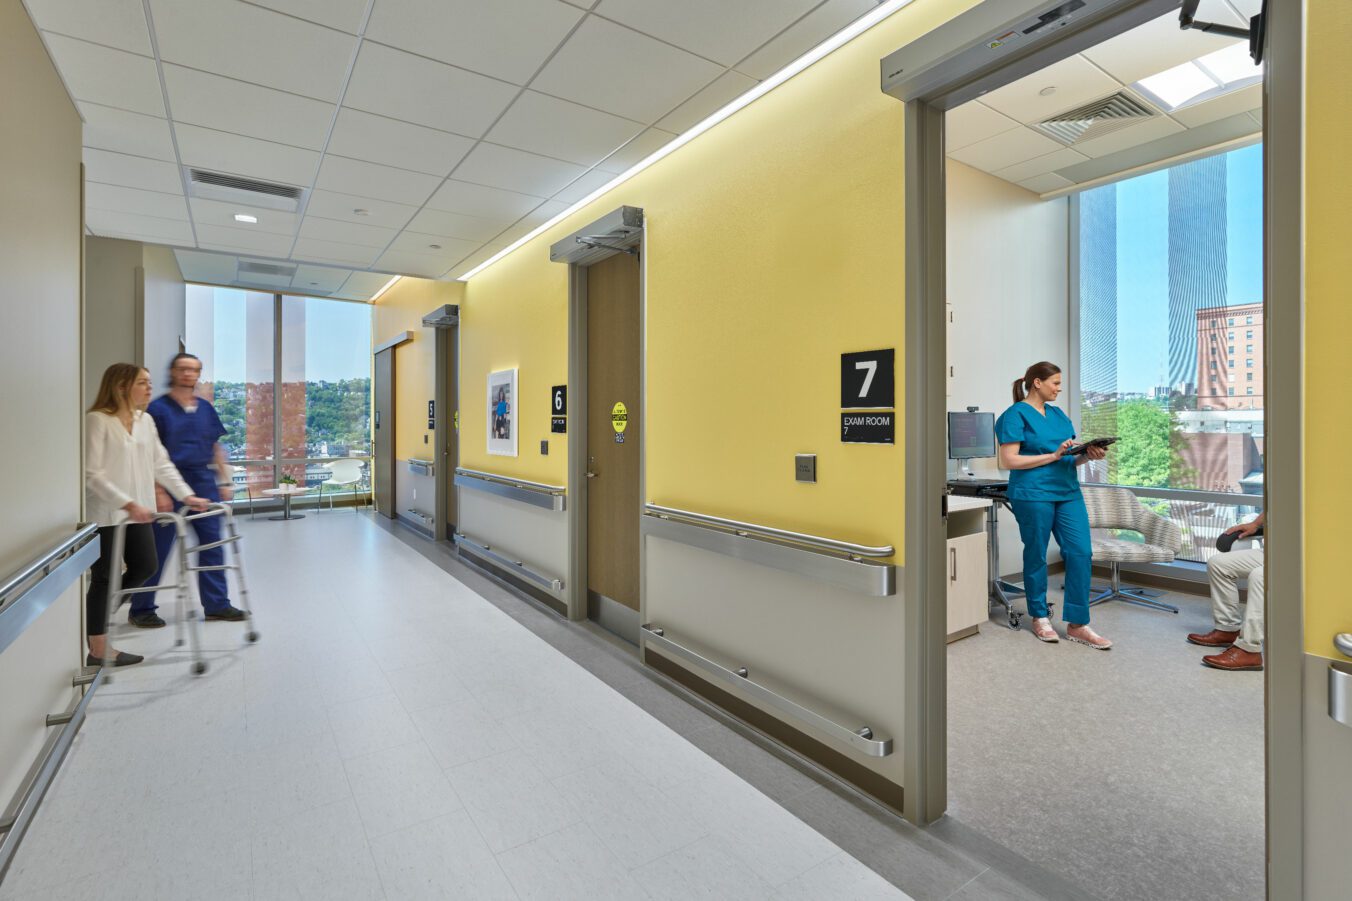 Patient facilities include 83 eye exam rooms and 10 rehab exam rooms at UPMC Vision and Rehabilitation Pavilion